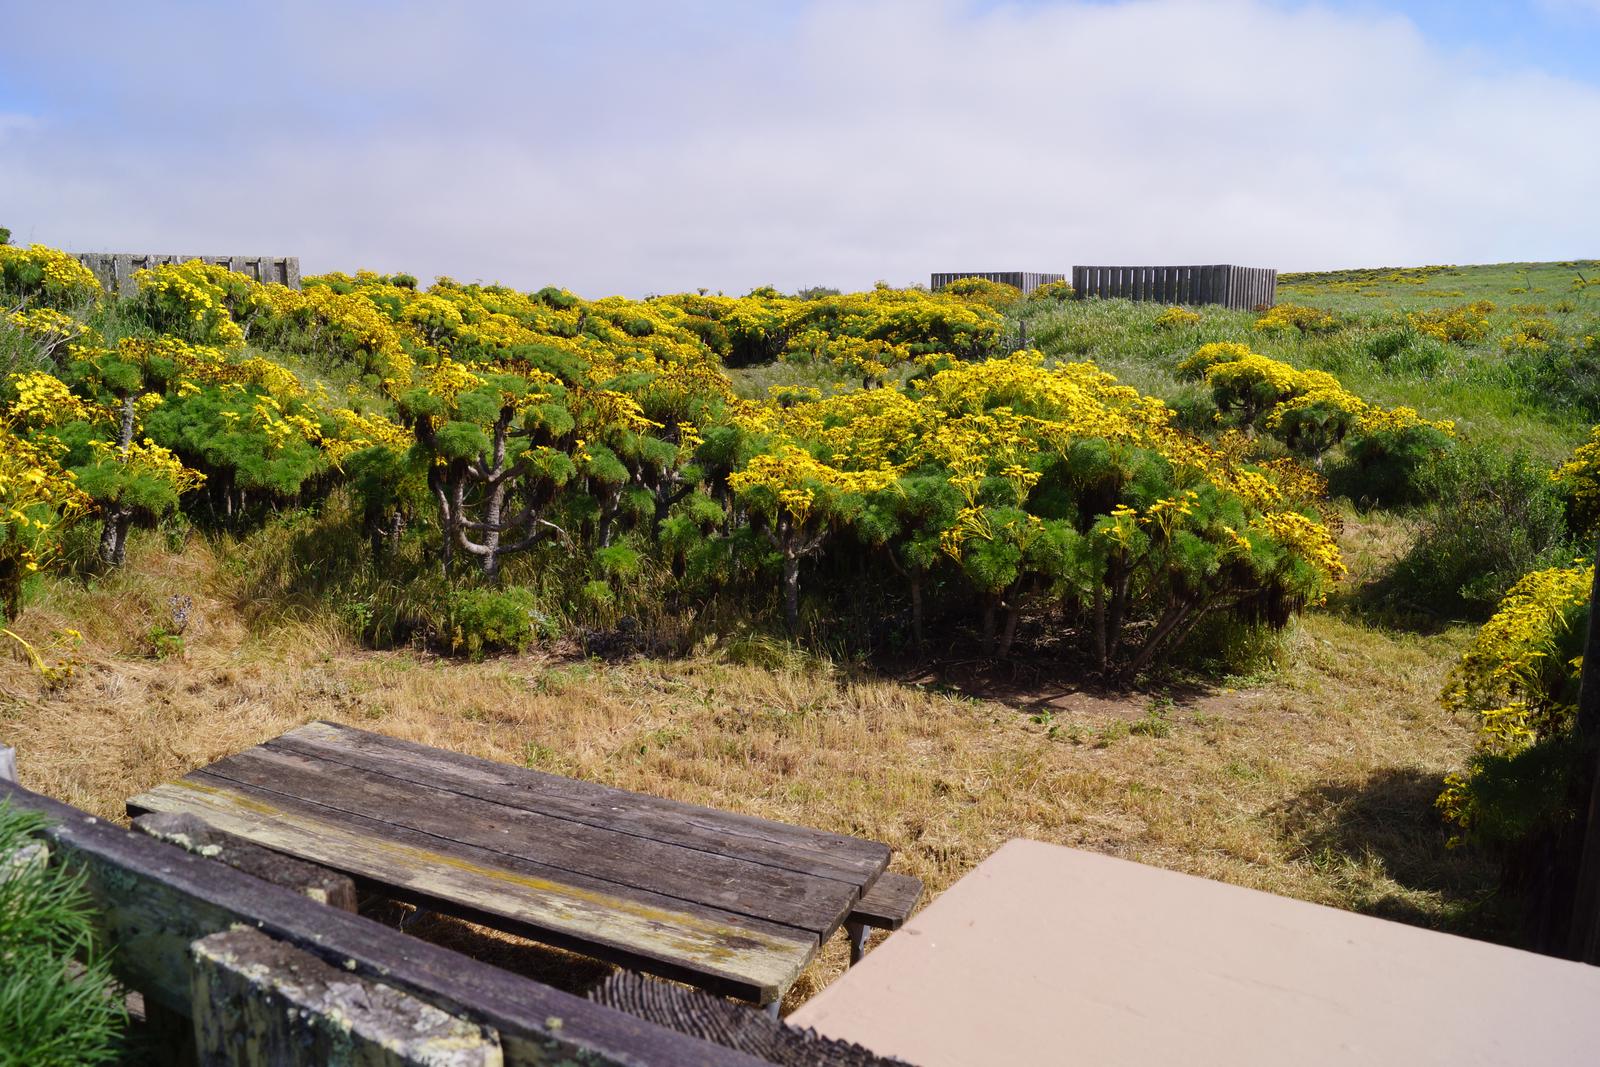 Wood picnic table and five-foot windbreak surrounded by yellow flowering plant. SAN MIGUEL ISLAND AREA - 001
